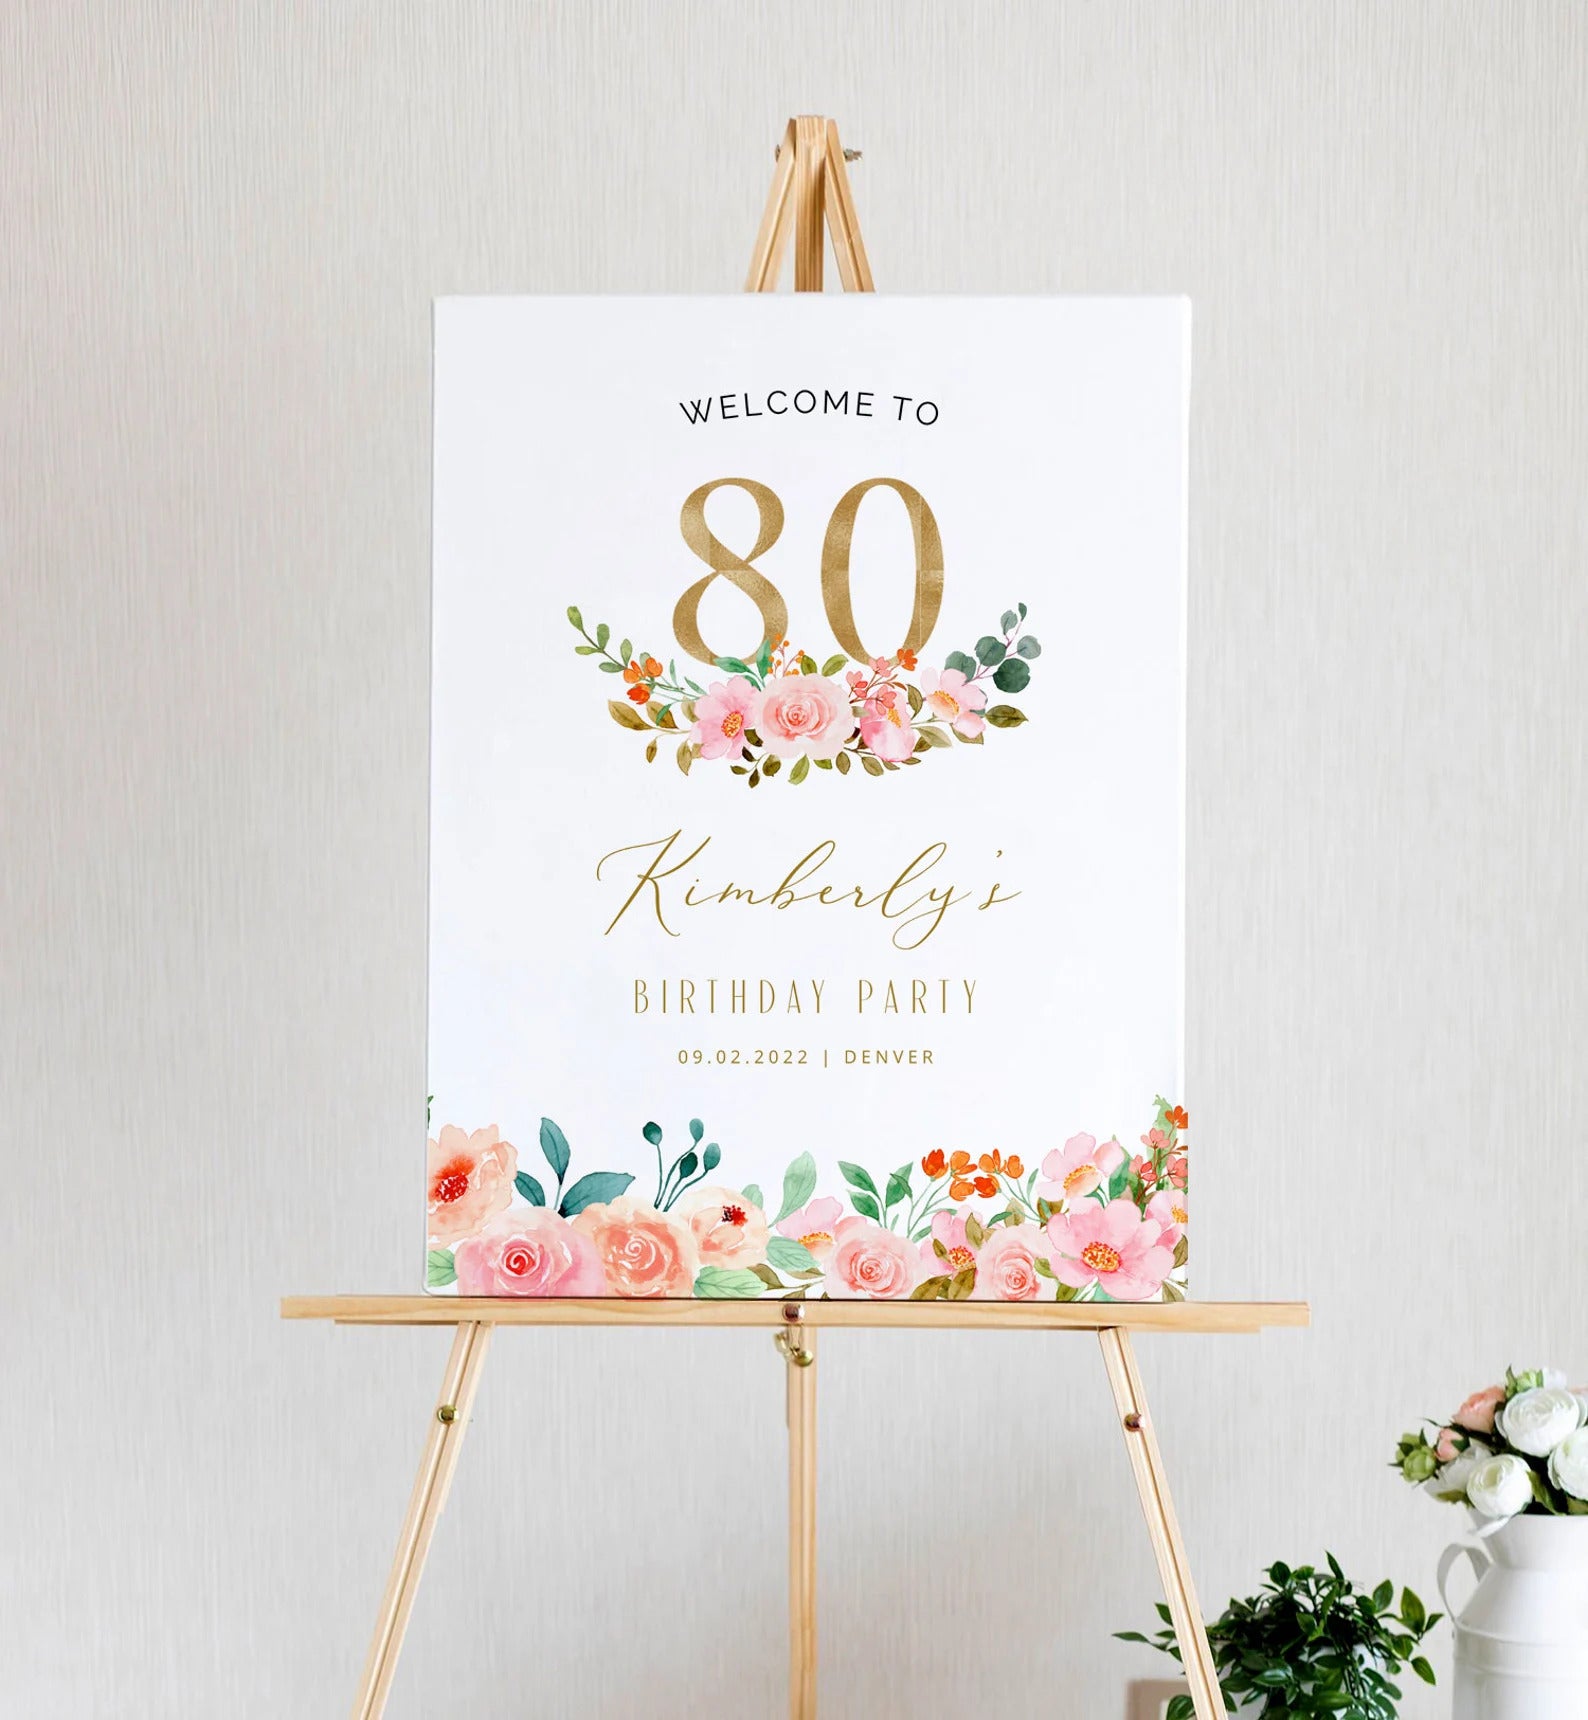 Elegant Blush Pink Welcome Sign Template